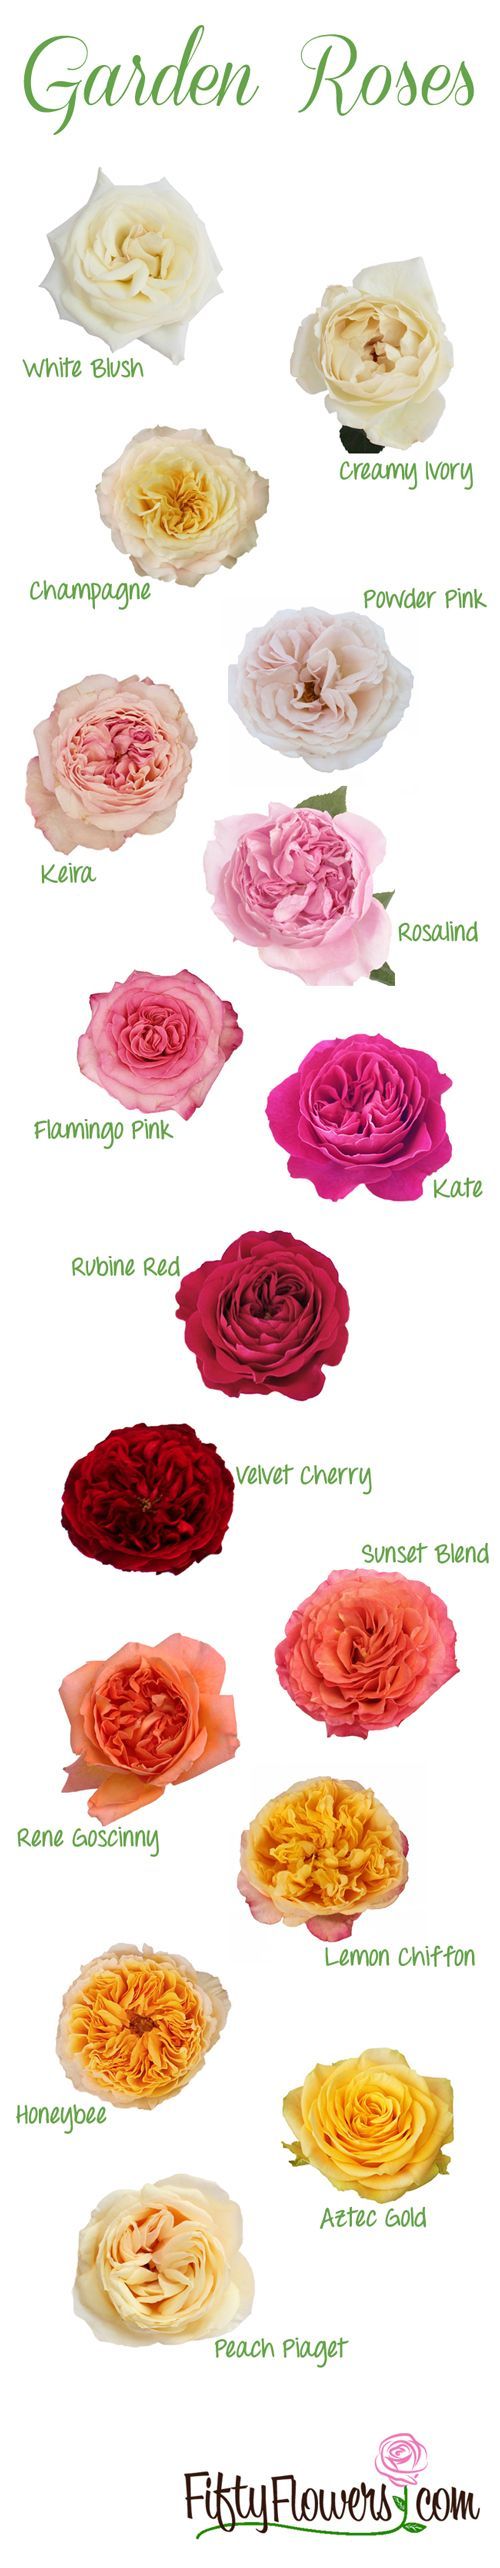 These are just some of the Gorgeous Garden Roses available at FiftyFlowers.com! Click Through to see All the Garden Roses we